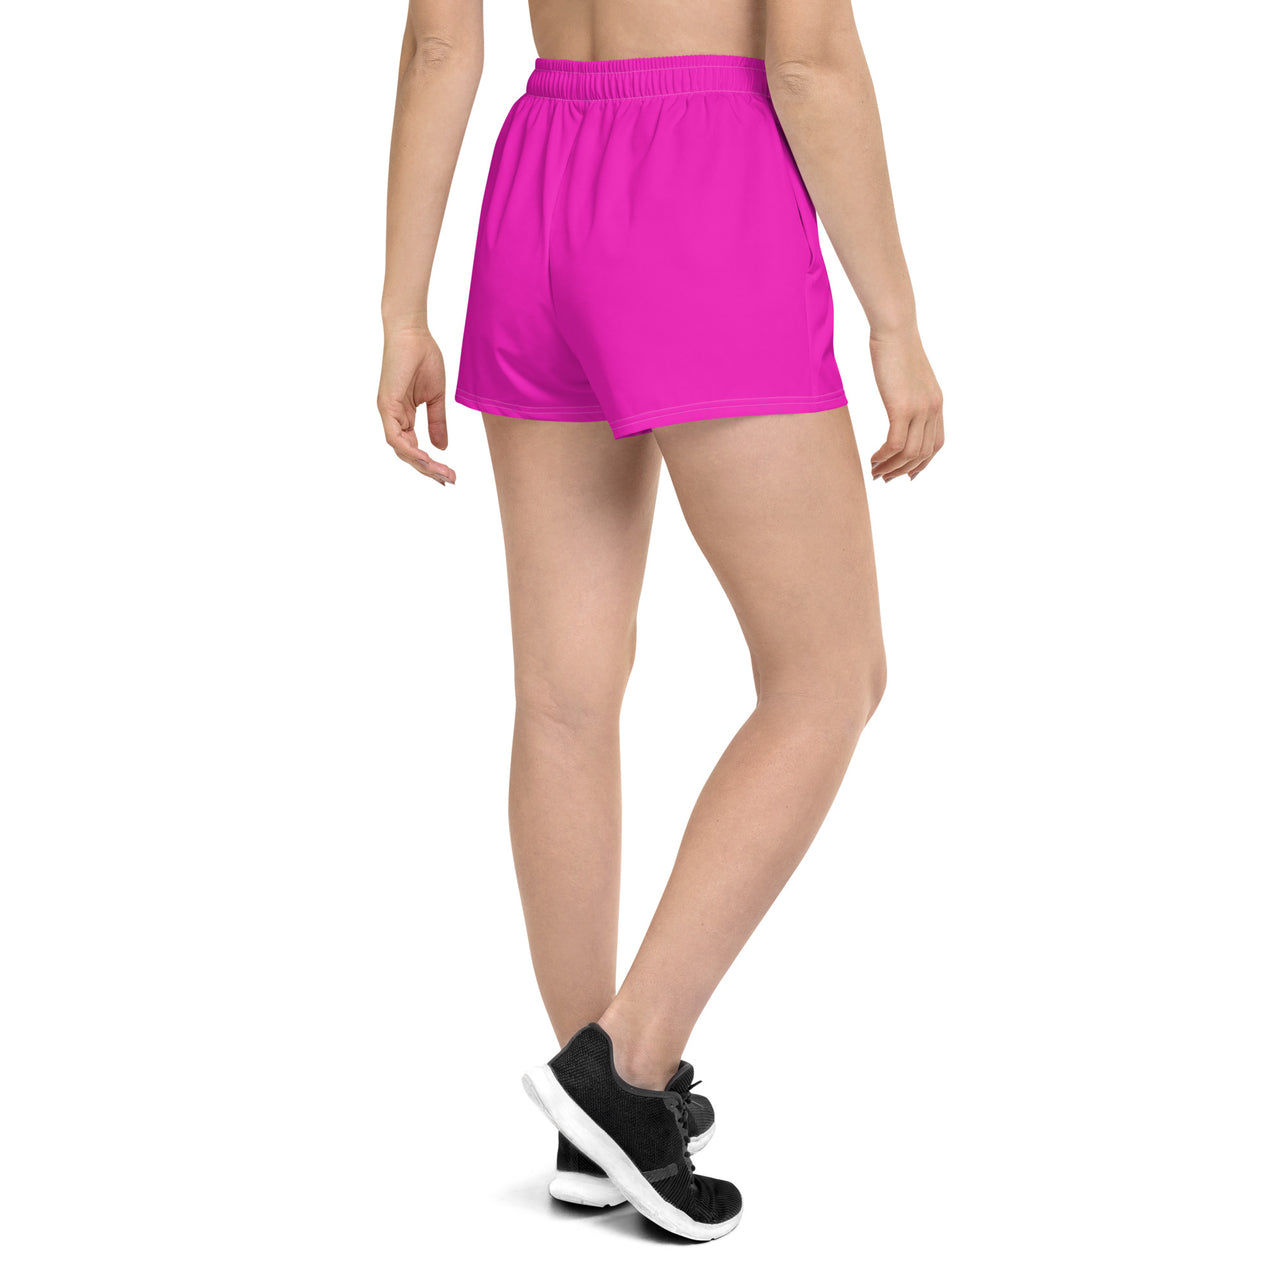 Women’s Recycled Solid Athletic Shorts - Shocking Pink SHAVA CO